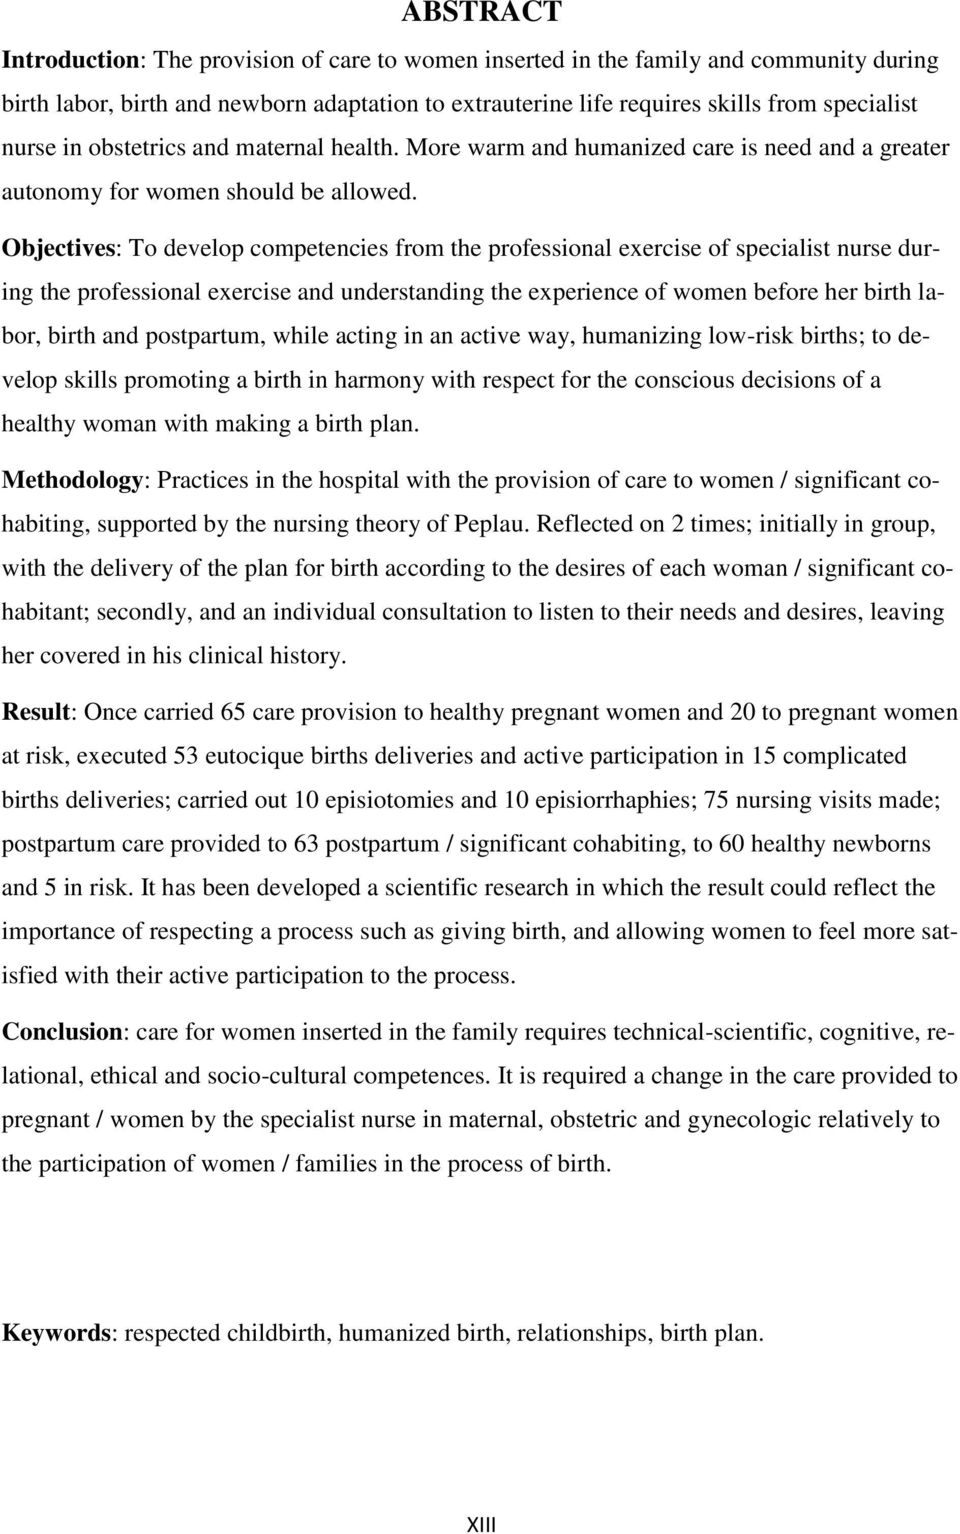 Objectives: To develop competencies from the professional exercise of specialist nurse during the professional exercise and understanding the experience of women before her birth labor, birth and